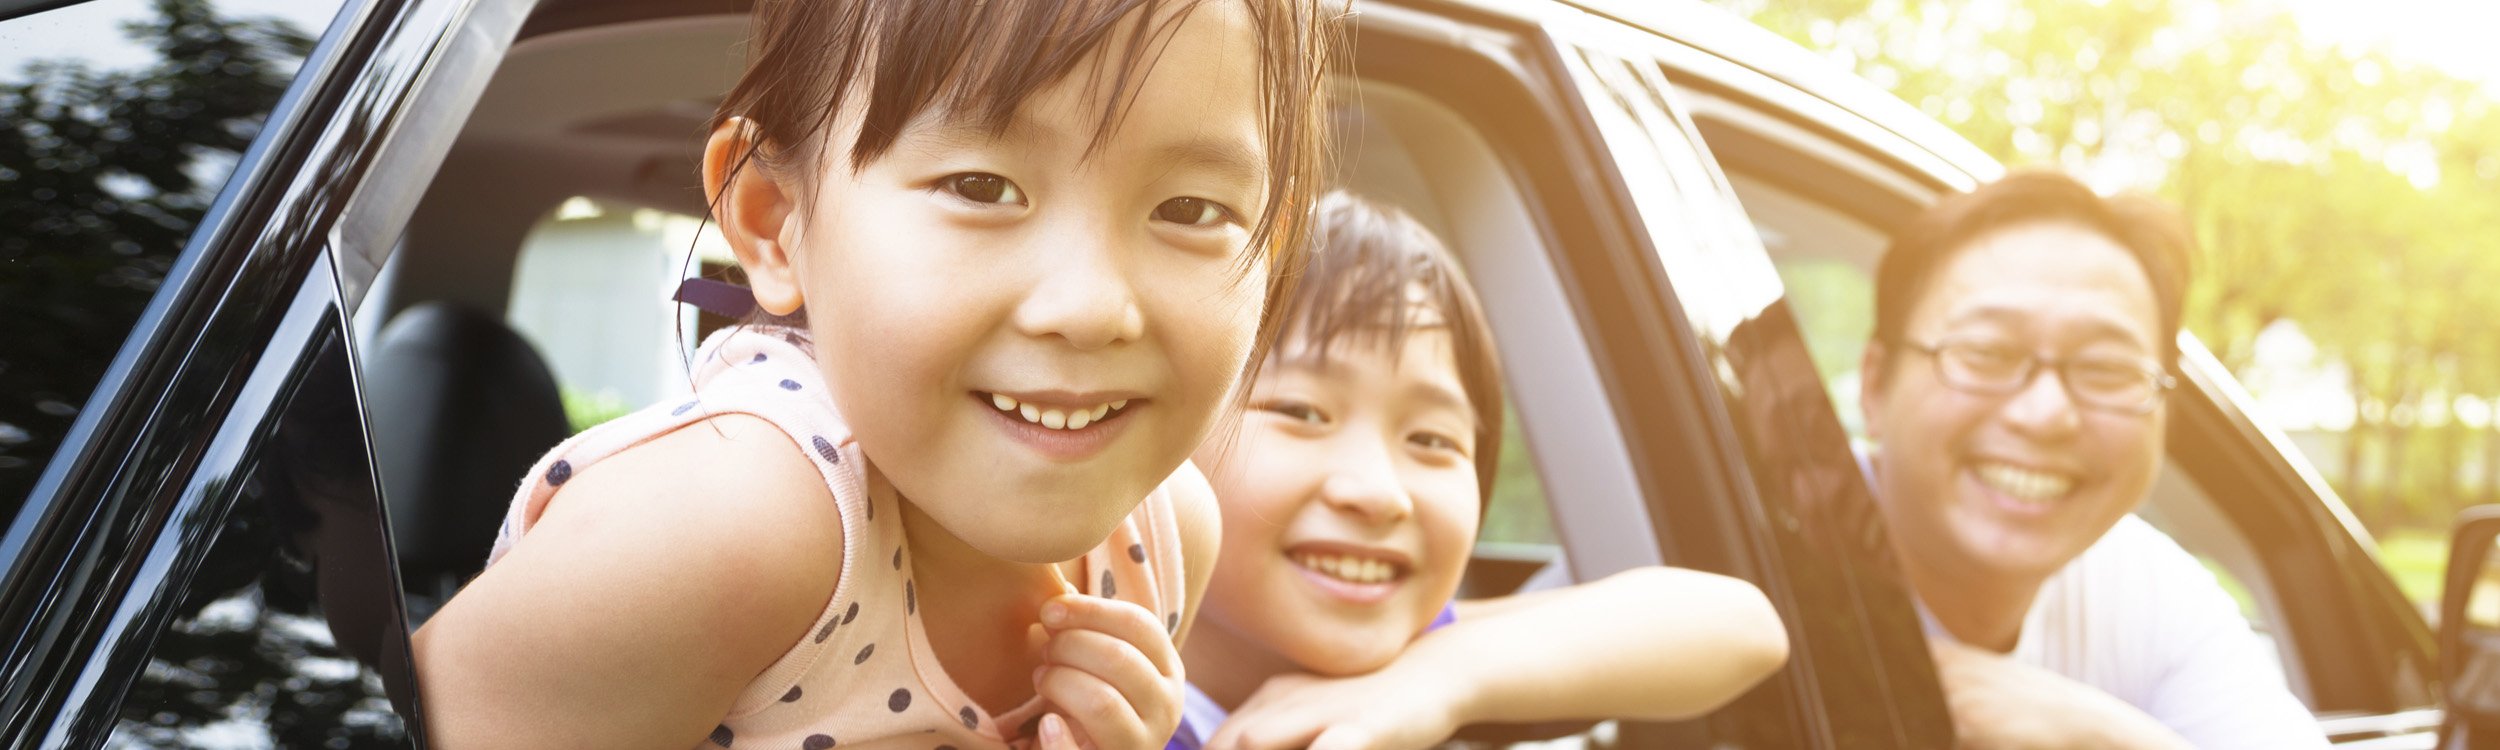 asian family of 3 smiling in a car